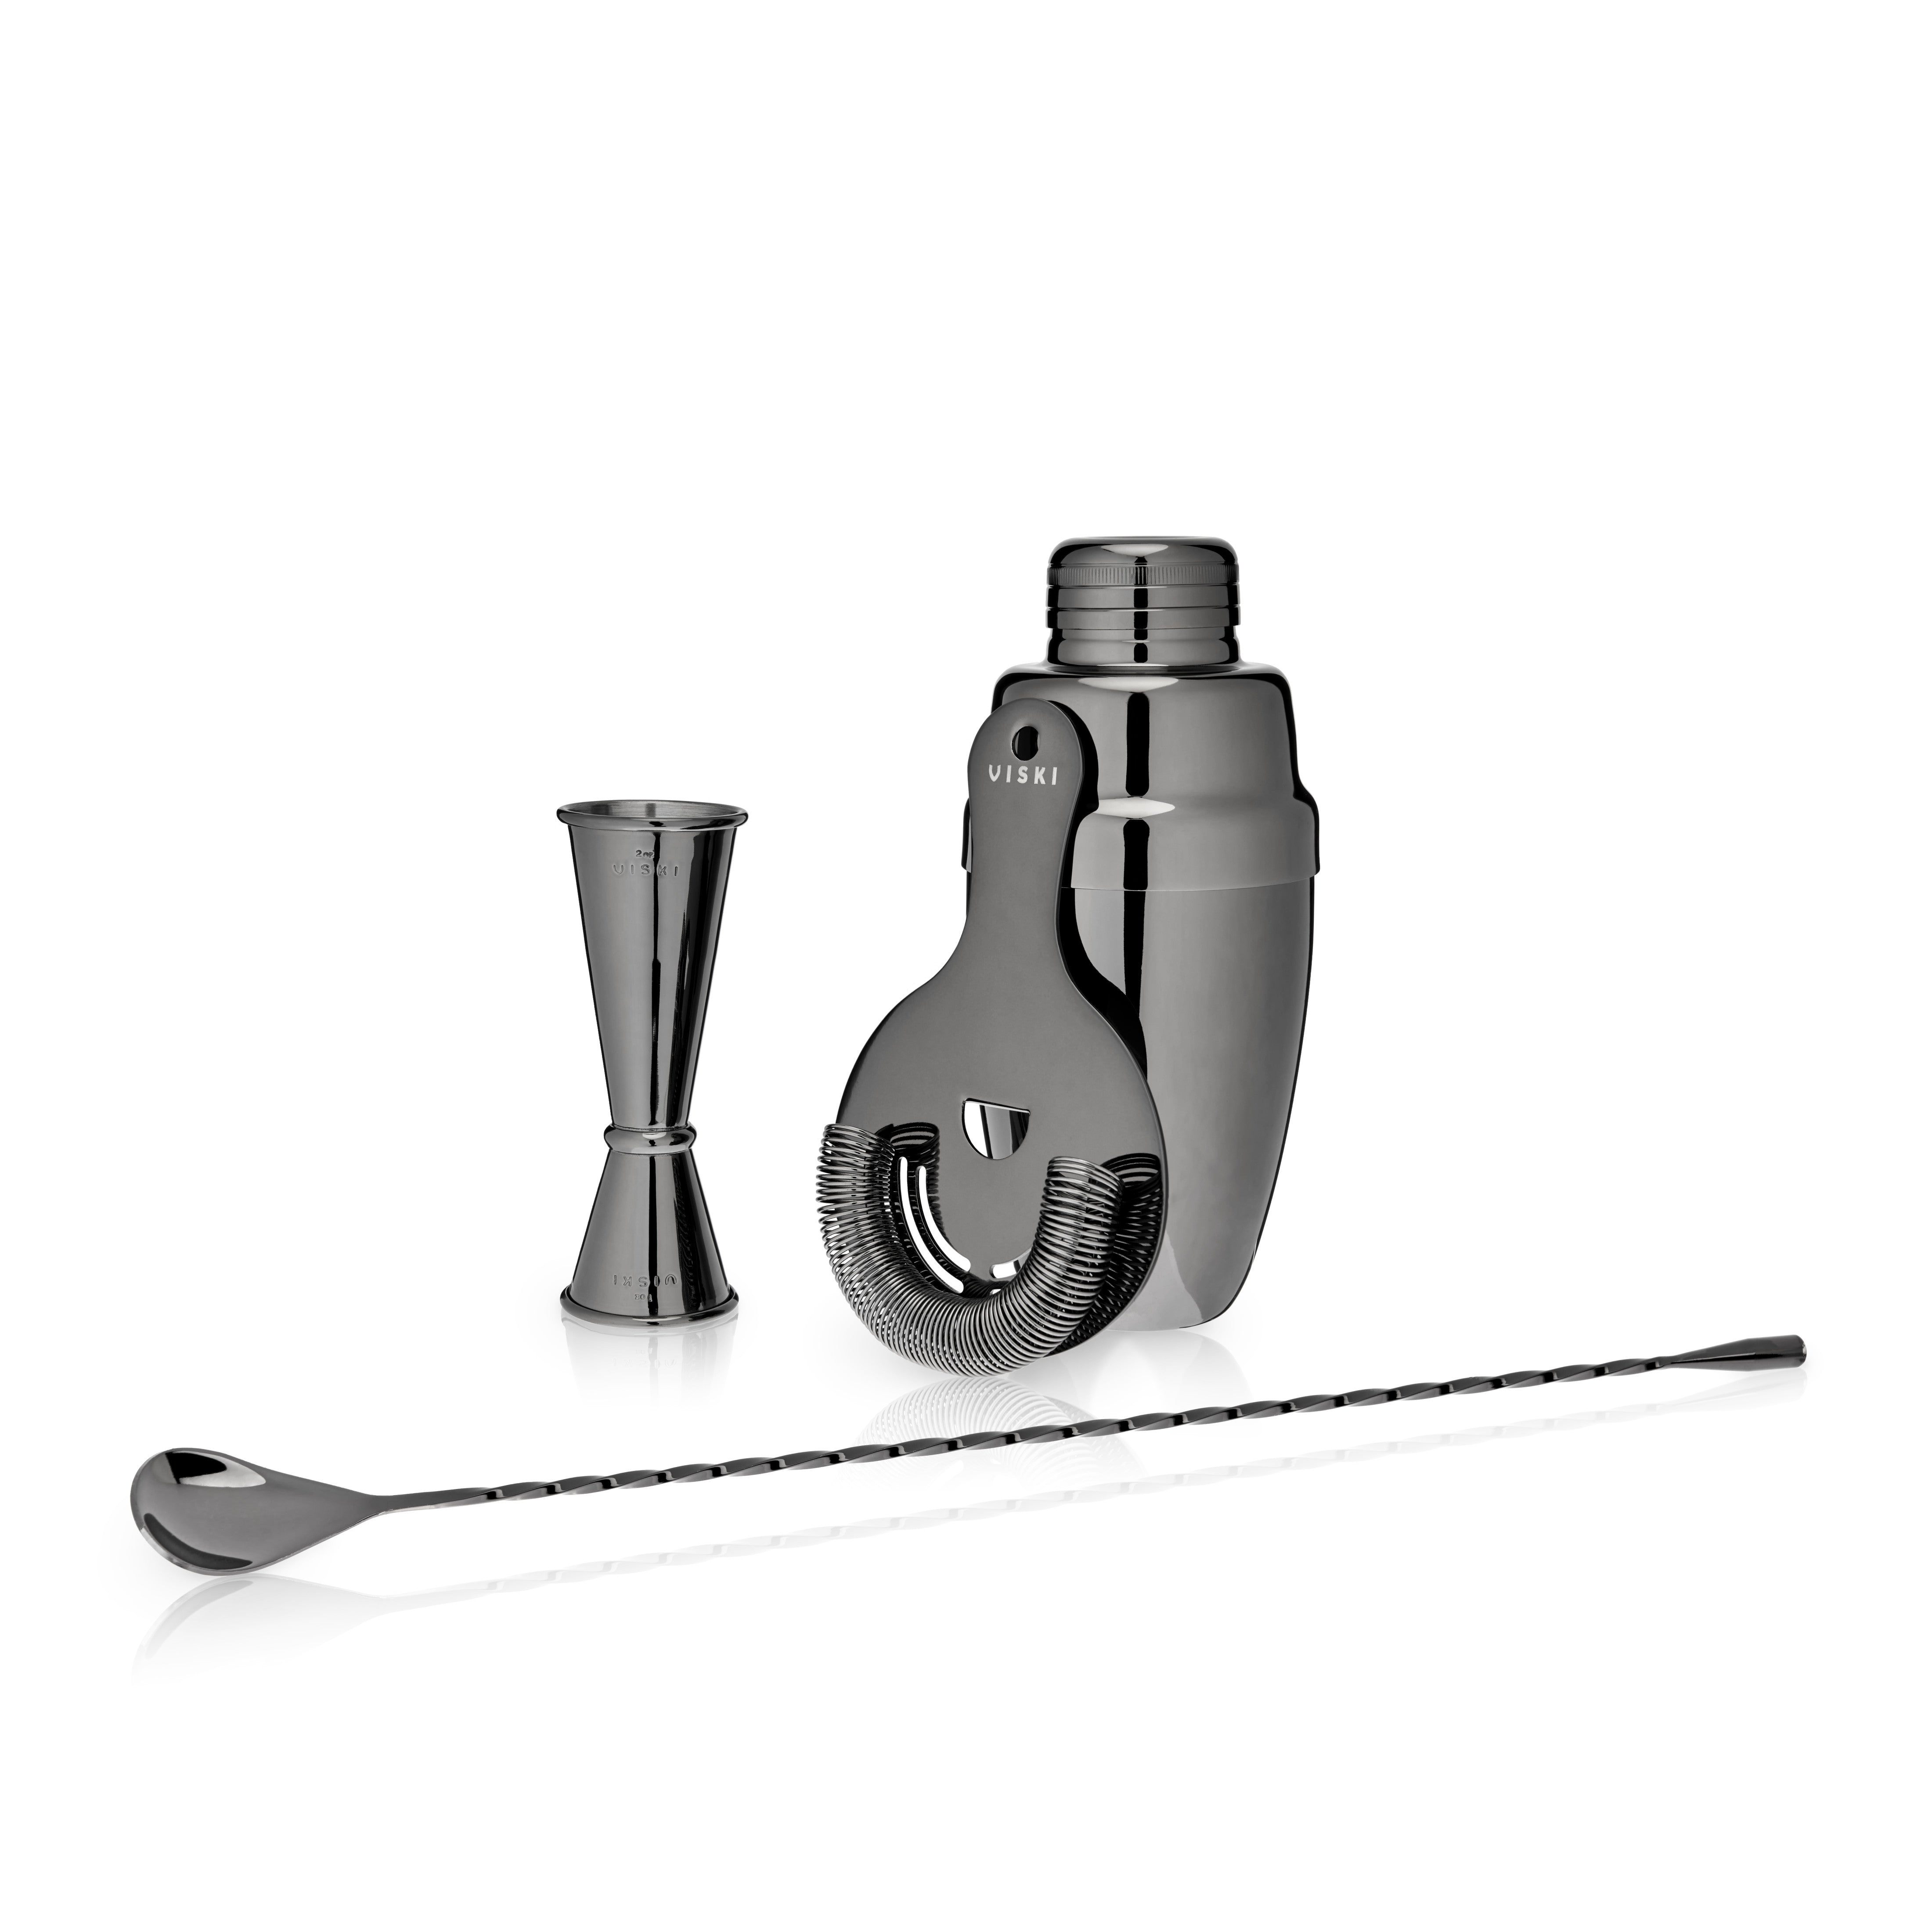  Mixology & Craft Cocktail Set - 7-Piece Bartender Kit with Mixing  Glass Set, Japanese Jigger, Spoon, Muddler, and Strainer - Perfect for Old  Fashioned Cocktails and Home Bars: Home & Kitchen